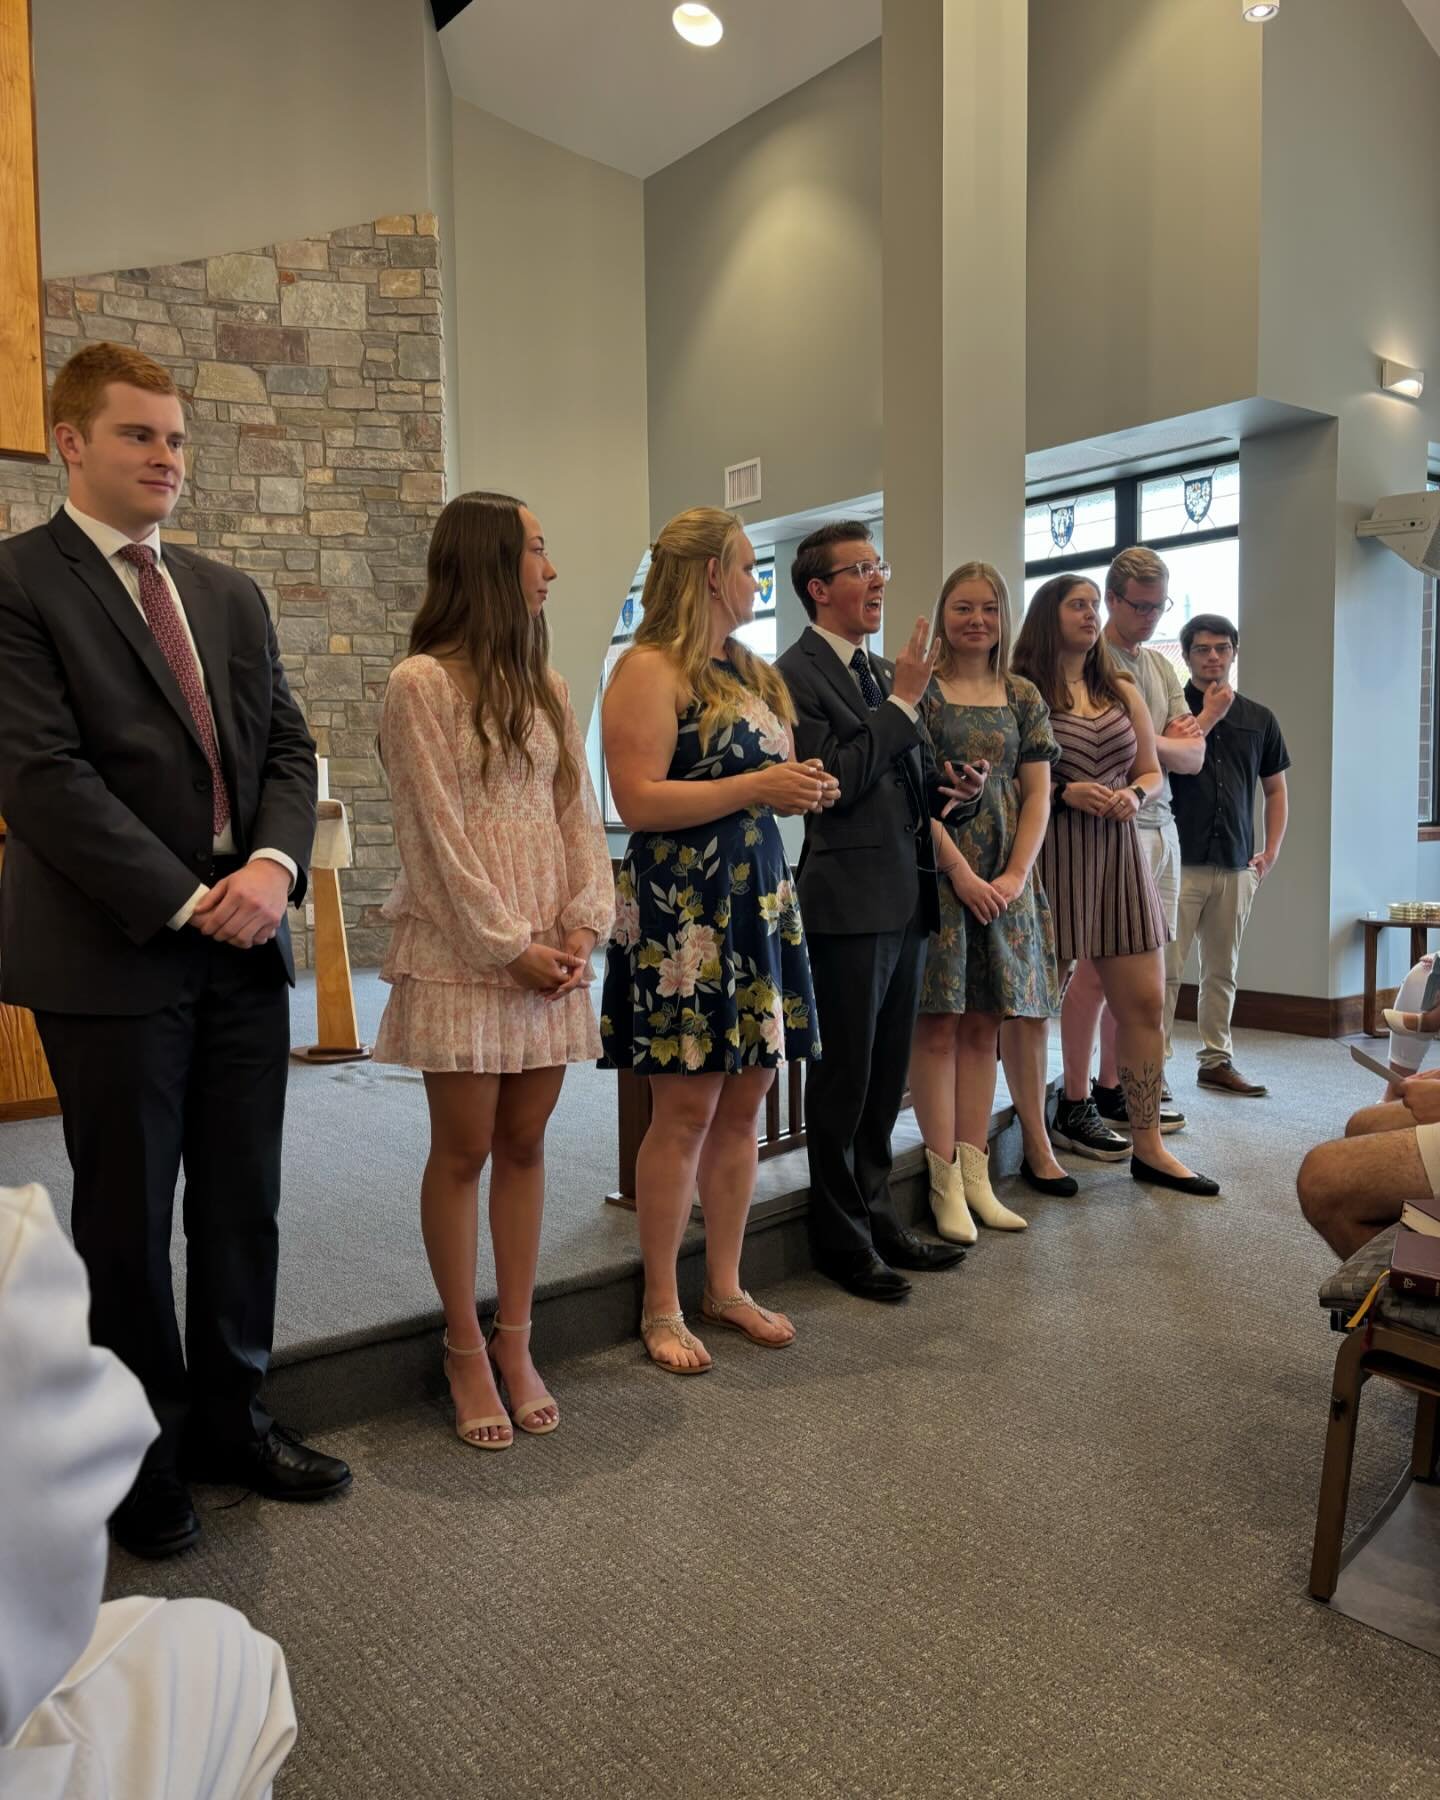 Congratulations to our May graduates! We are so extremely proud and thankful for each one of you. You will be missed, but we send you off with heartfelt prayers for a lifetime of proclaiming Christ at every opportunity. ❤️🙏🏻🎓 &ldquo;But you are a 